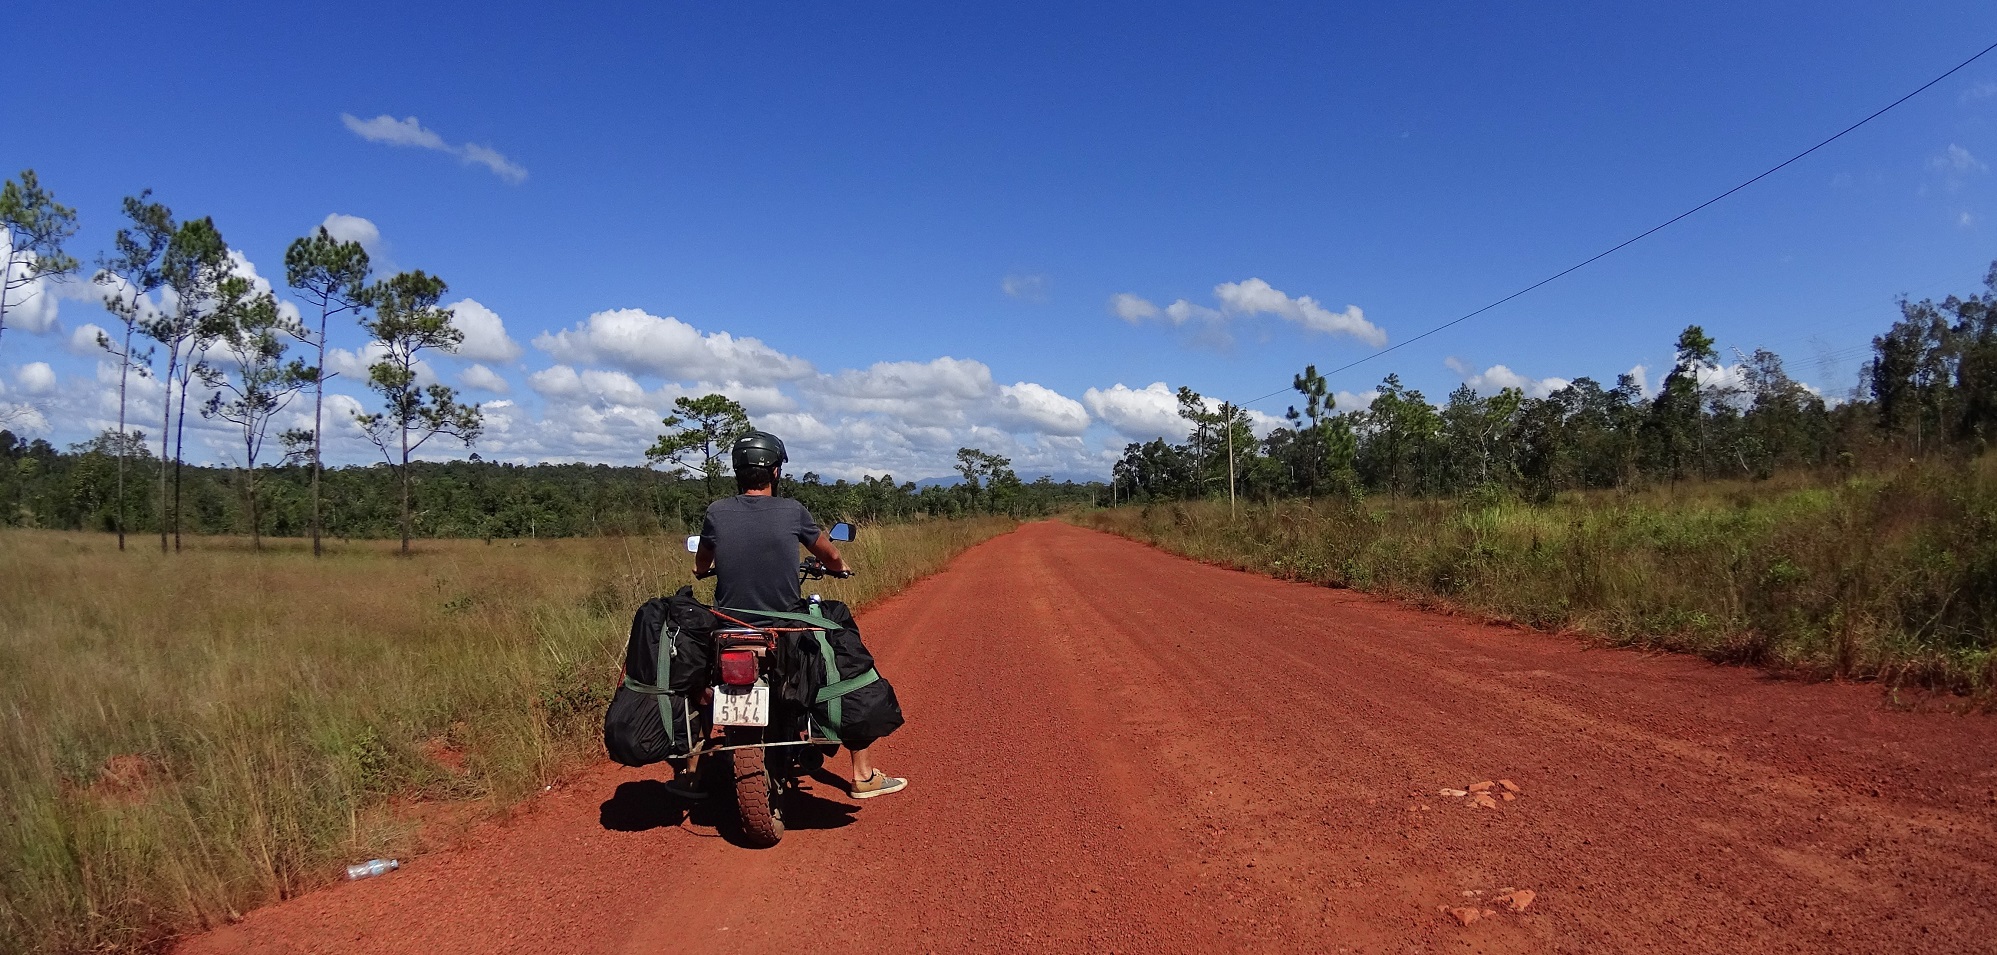 Motorcycle on red dirt roads towards Cardamom mountains